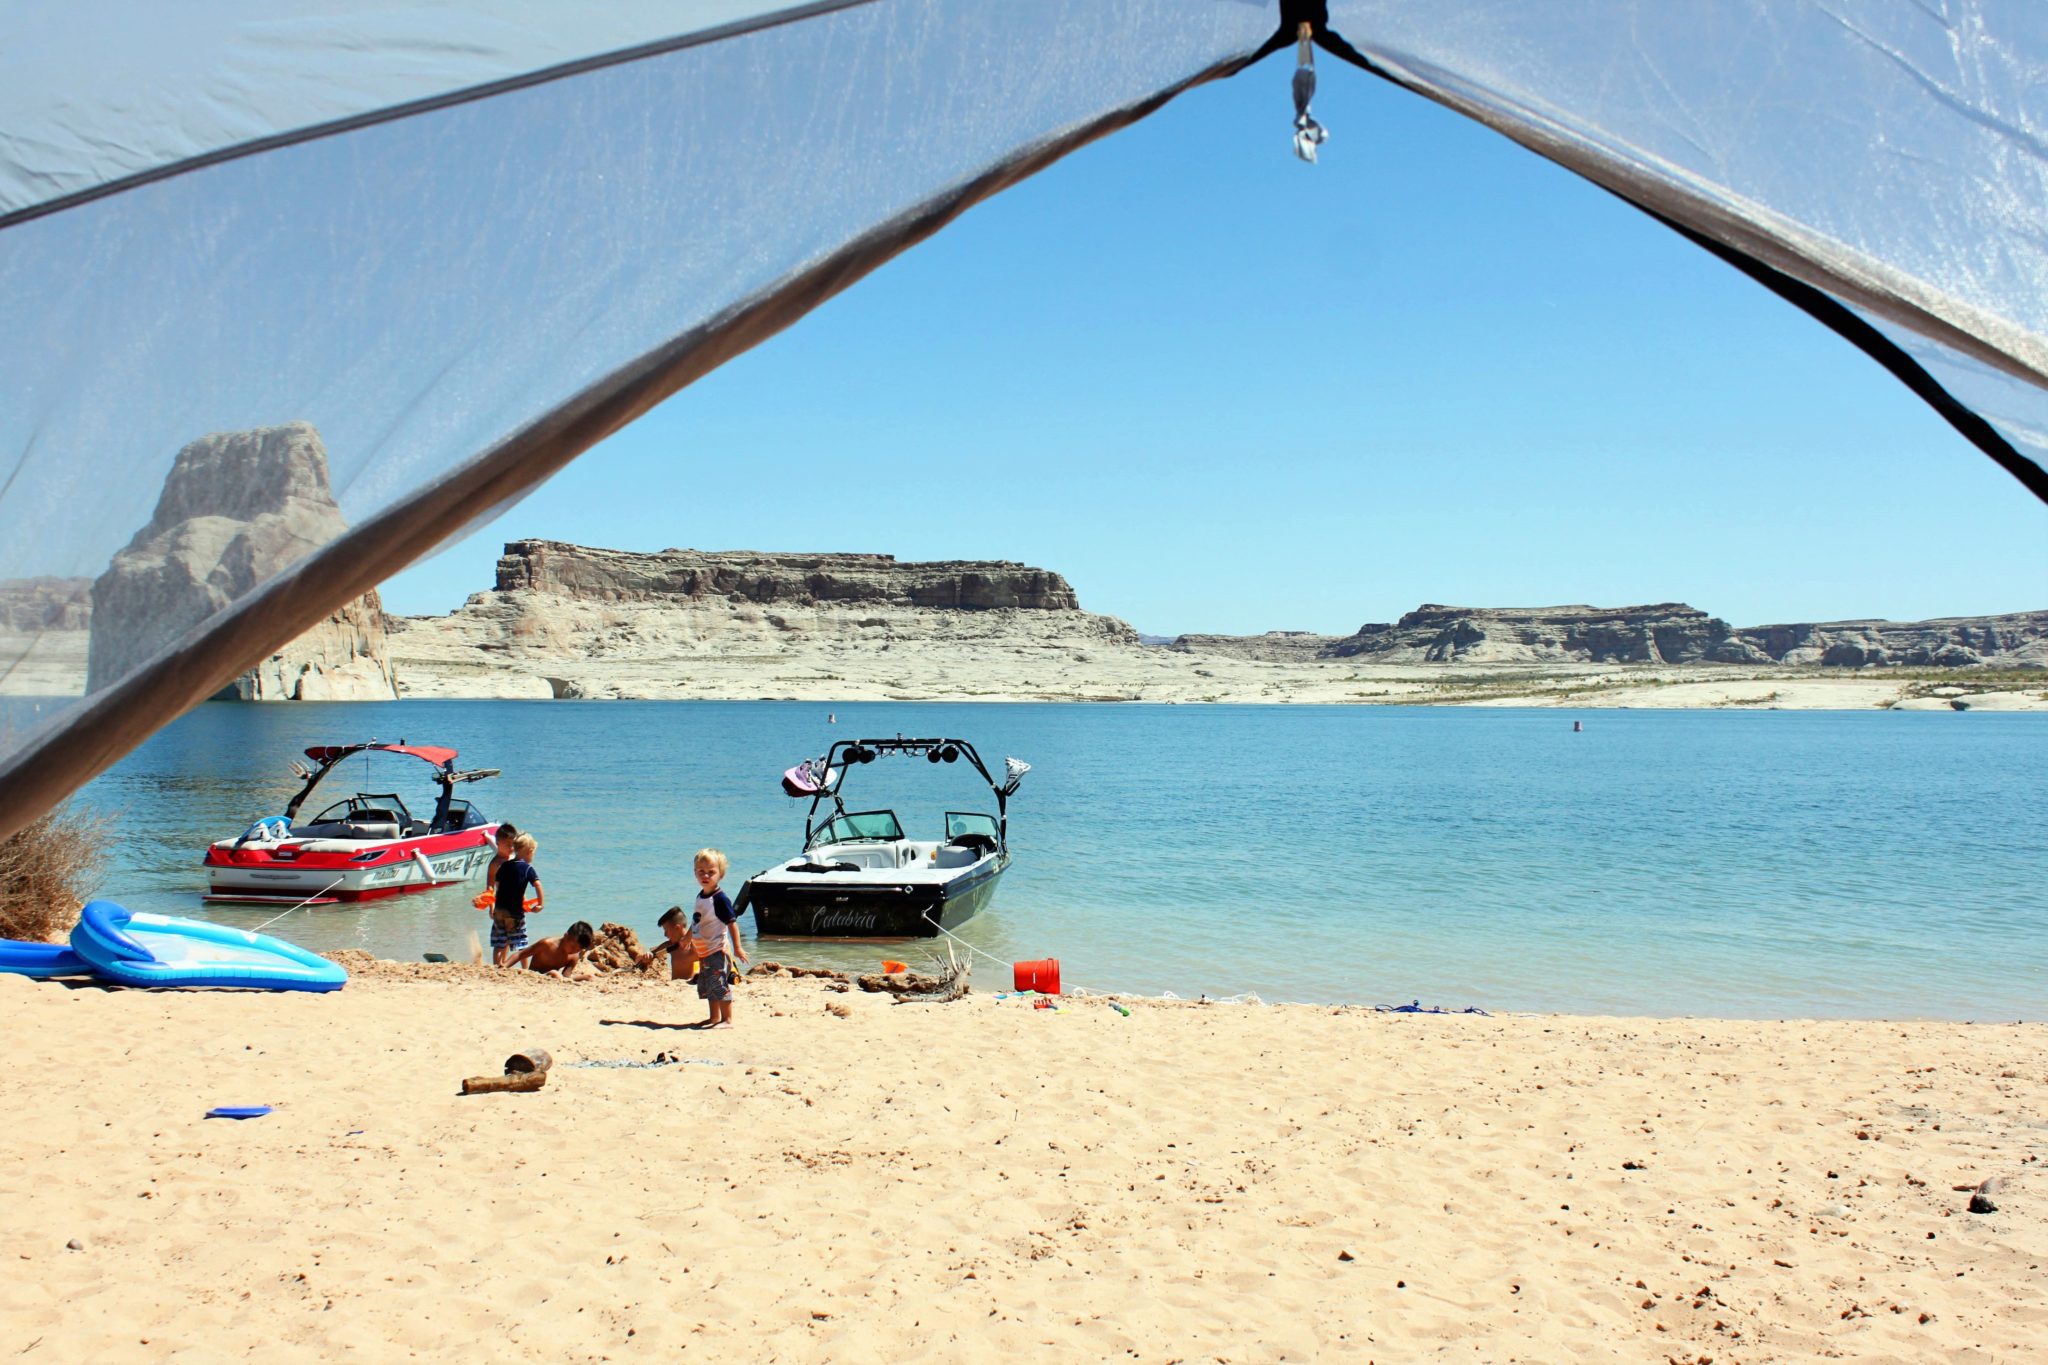 Where to stay at Lake Powell and tips for camping at Lone Rock Beach #lakepowell #utah #arizona #boating #simplywander